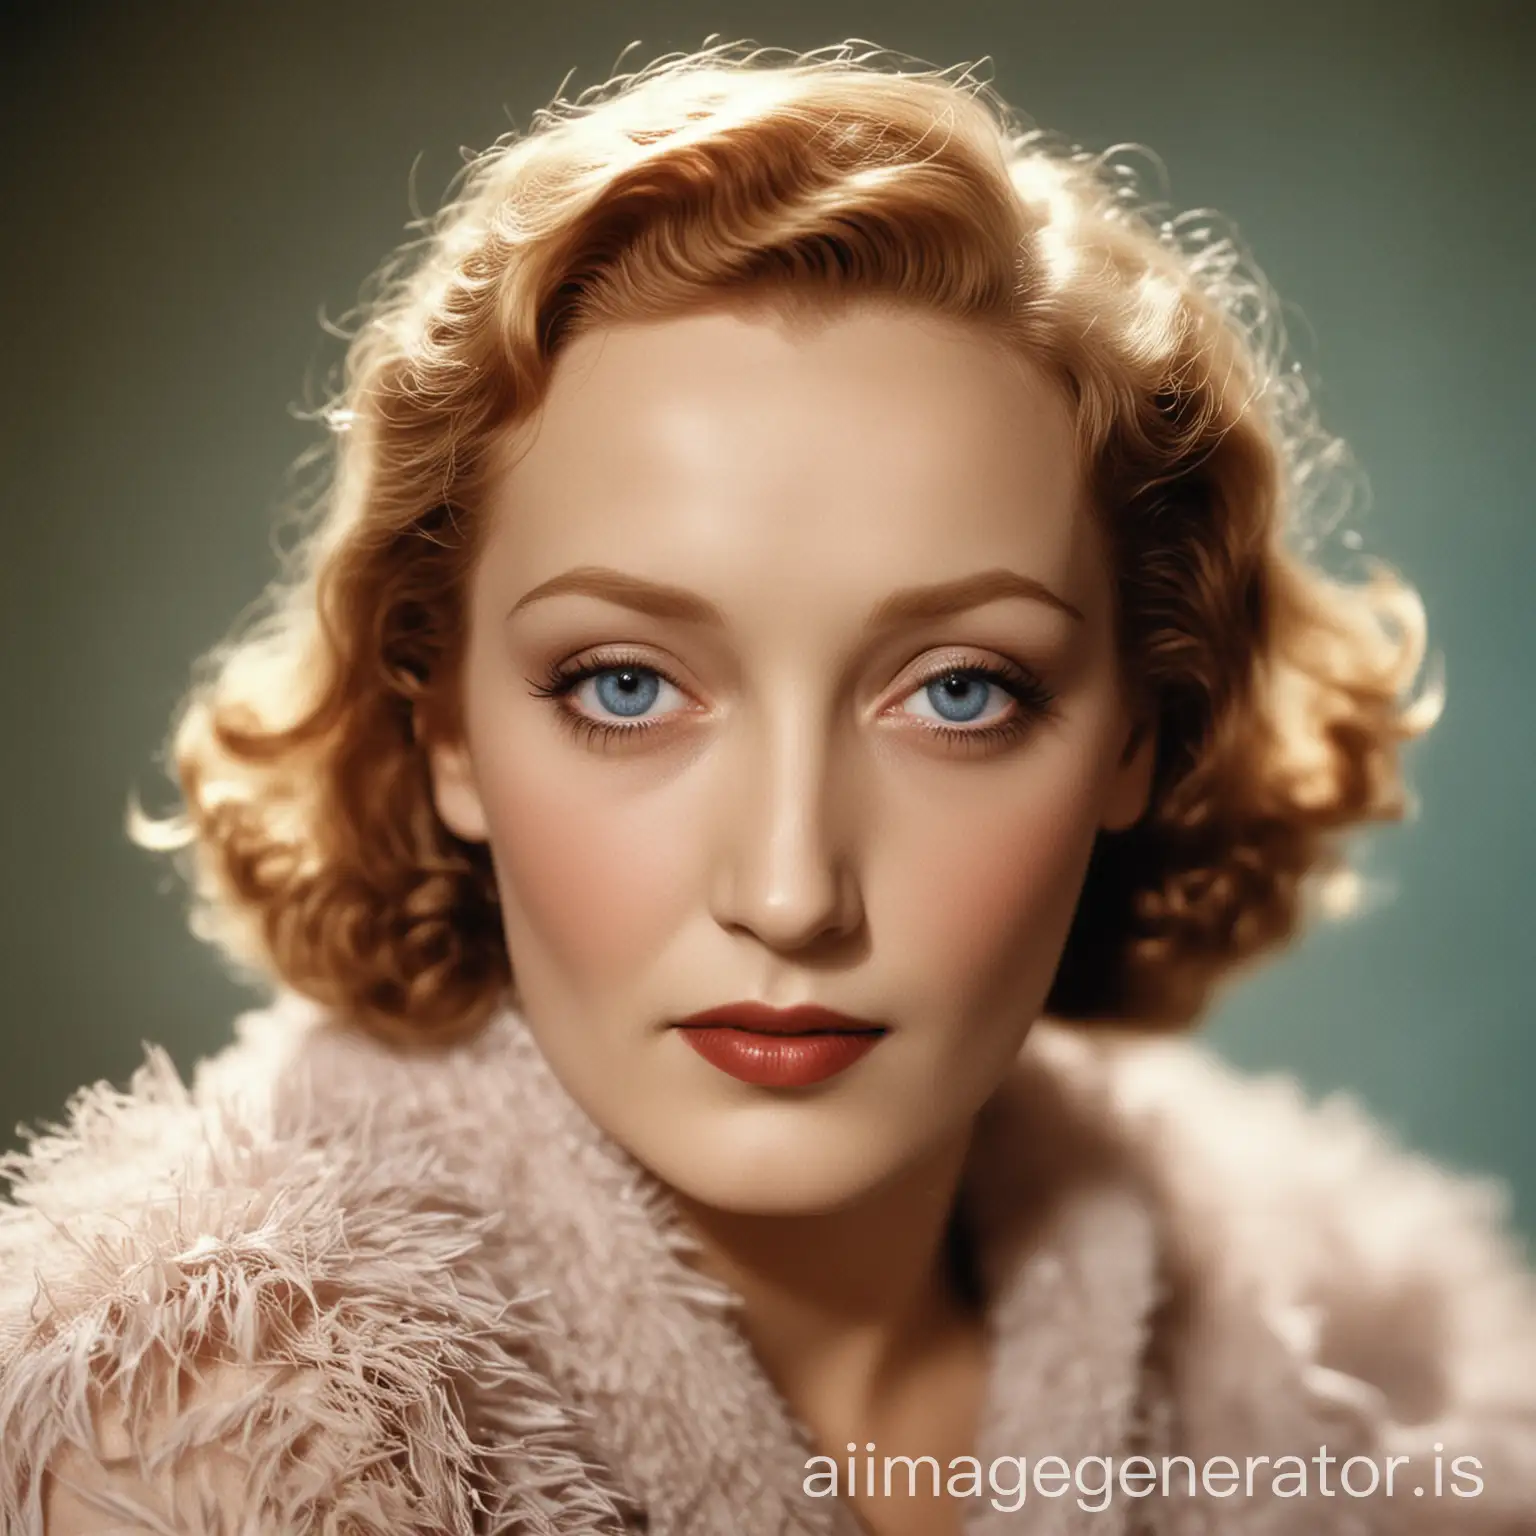 Marlene-Dietrich-Young-Woman-with-Blue-Eyes-in-Realistic-1931-Color-Photography